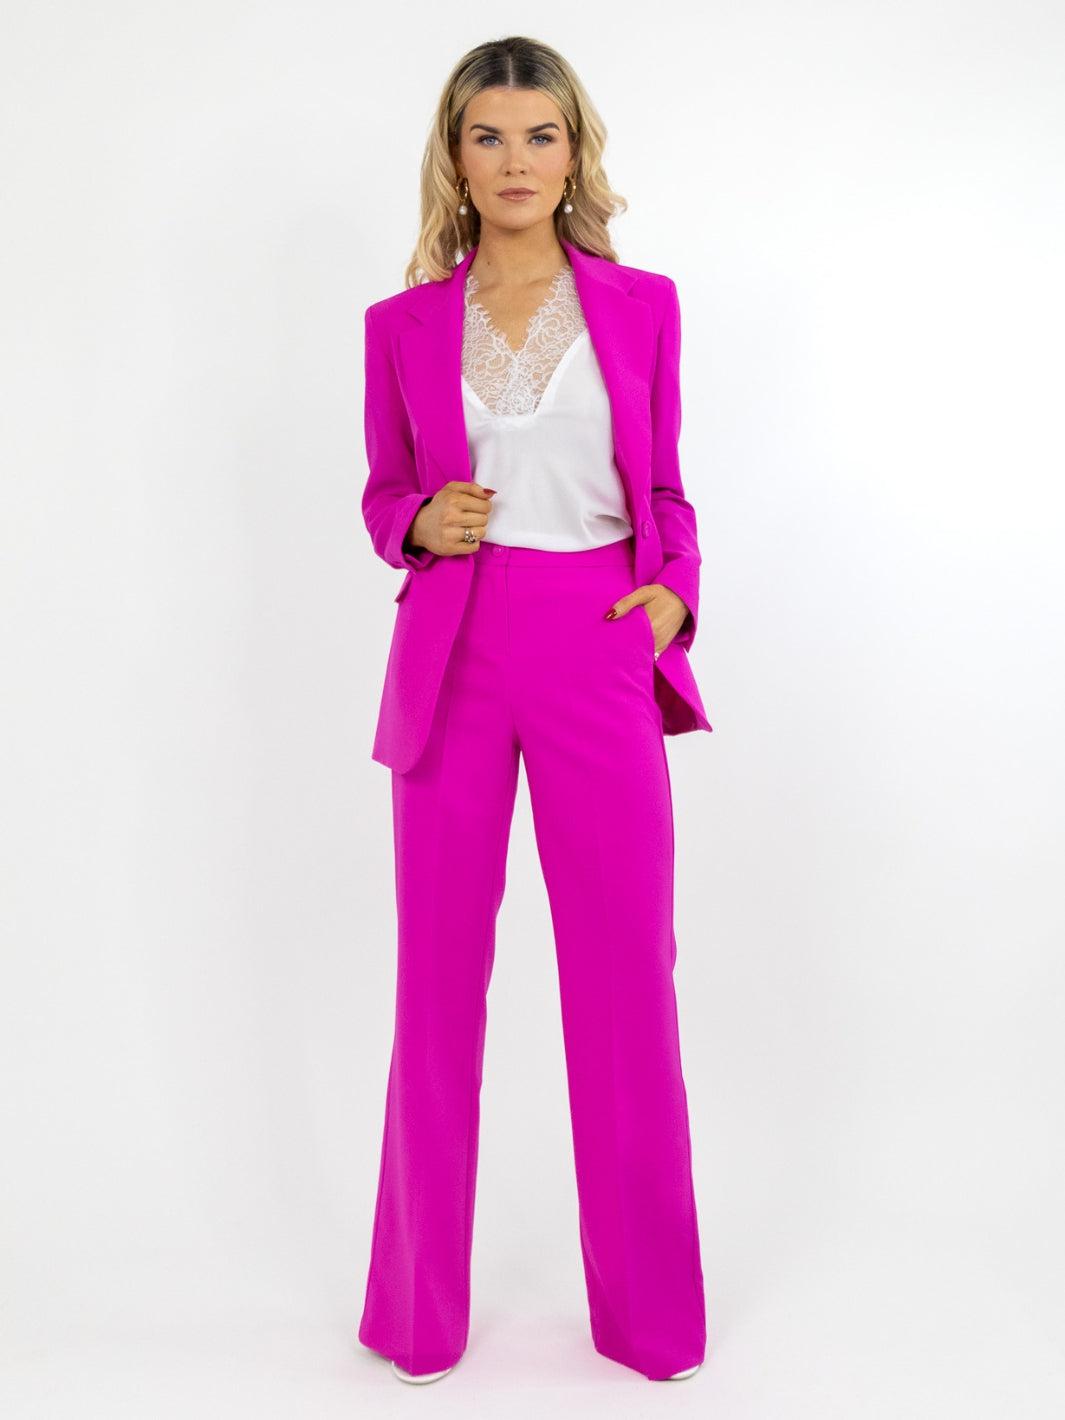 Kate & Pippa Palermo Wide Leg Trousers In Fuchsia Pink-Nicola Ross